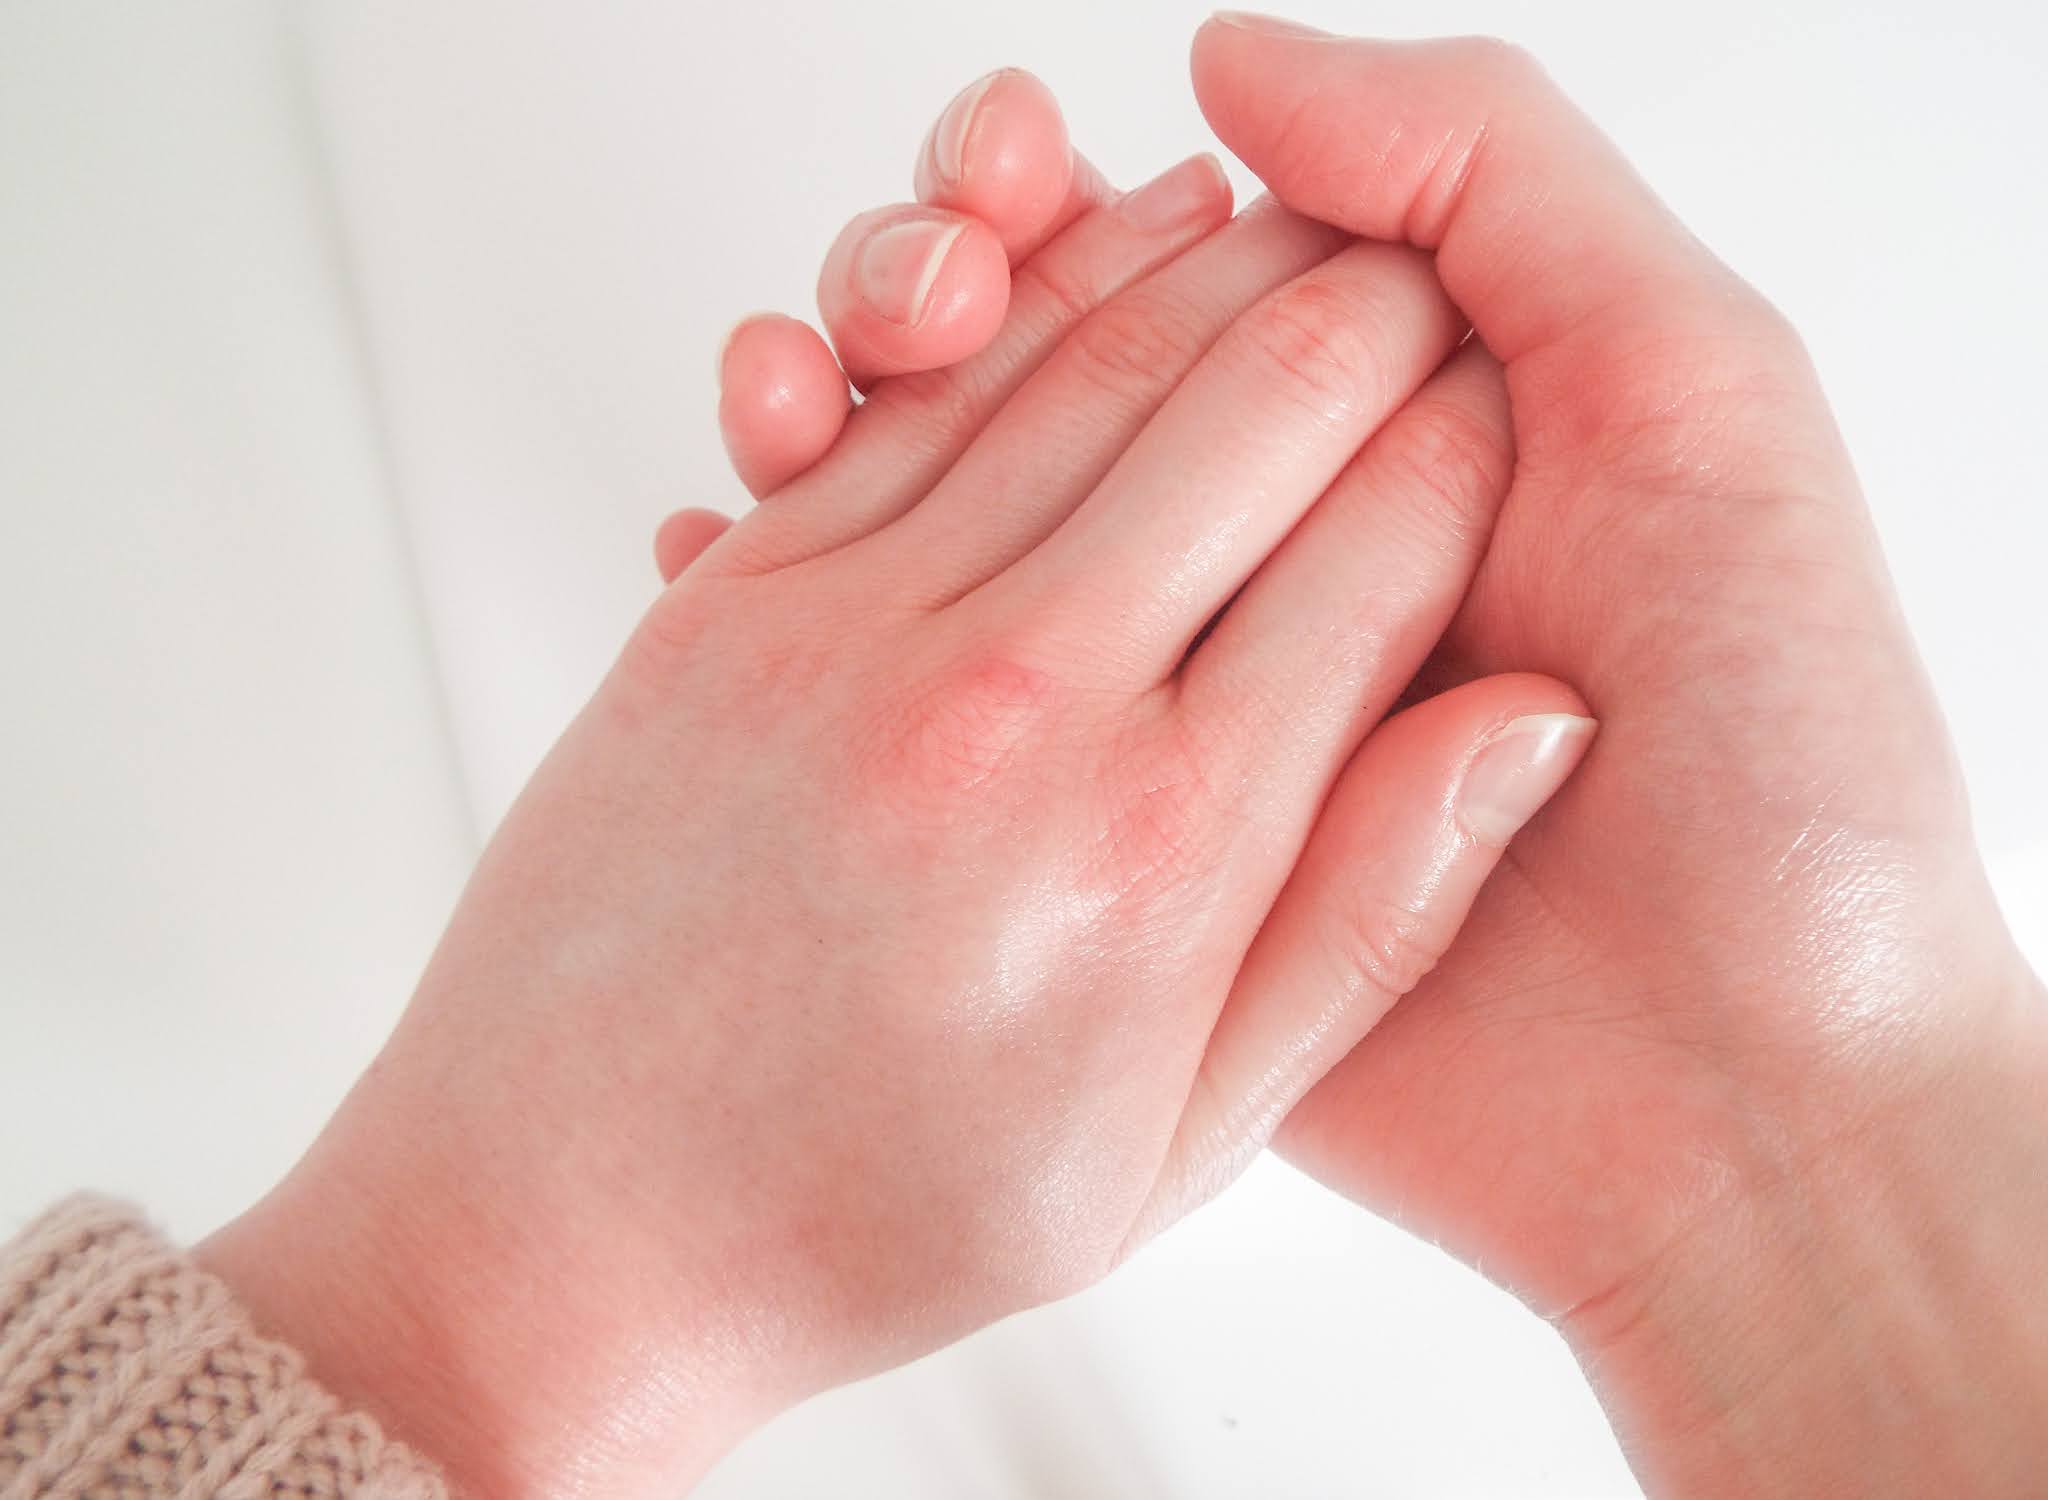 Picture of my healed sore, cracked hands, held hand in hand and looking supple and nourished.